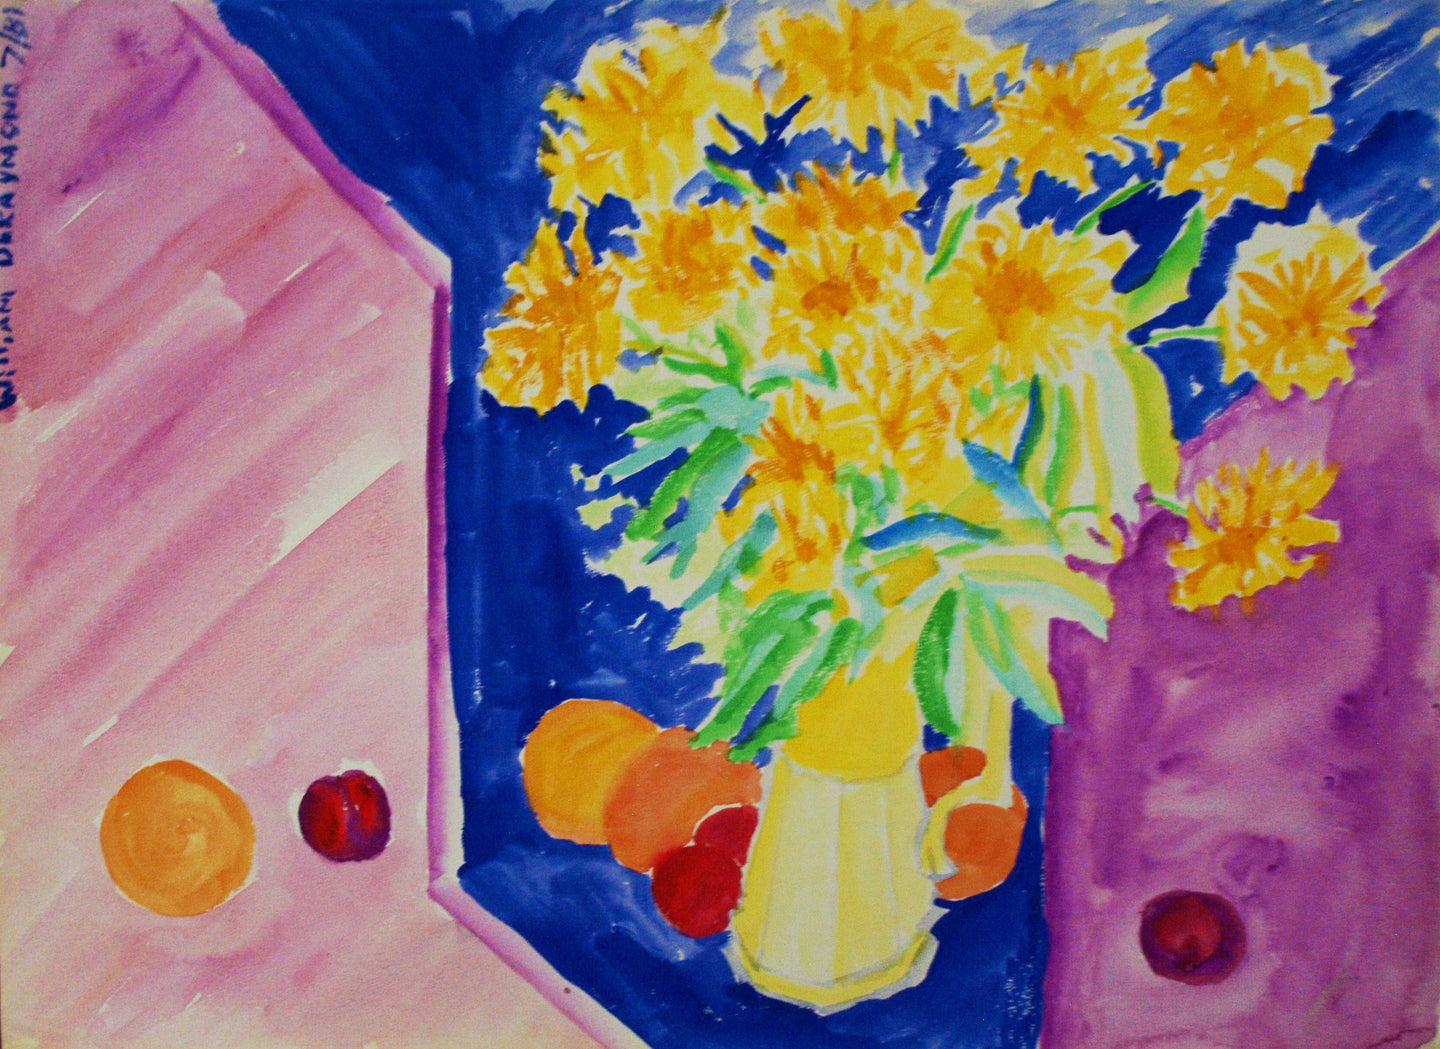 #watercolor #painting #art composition with Flowers, 22